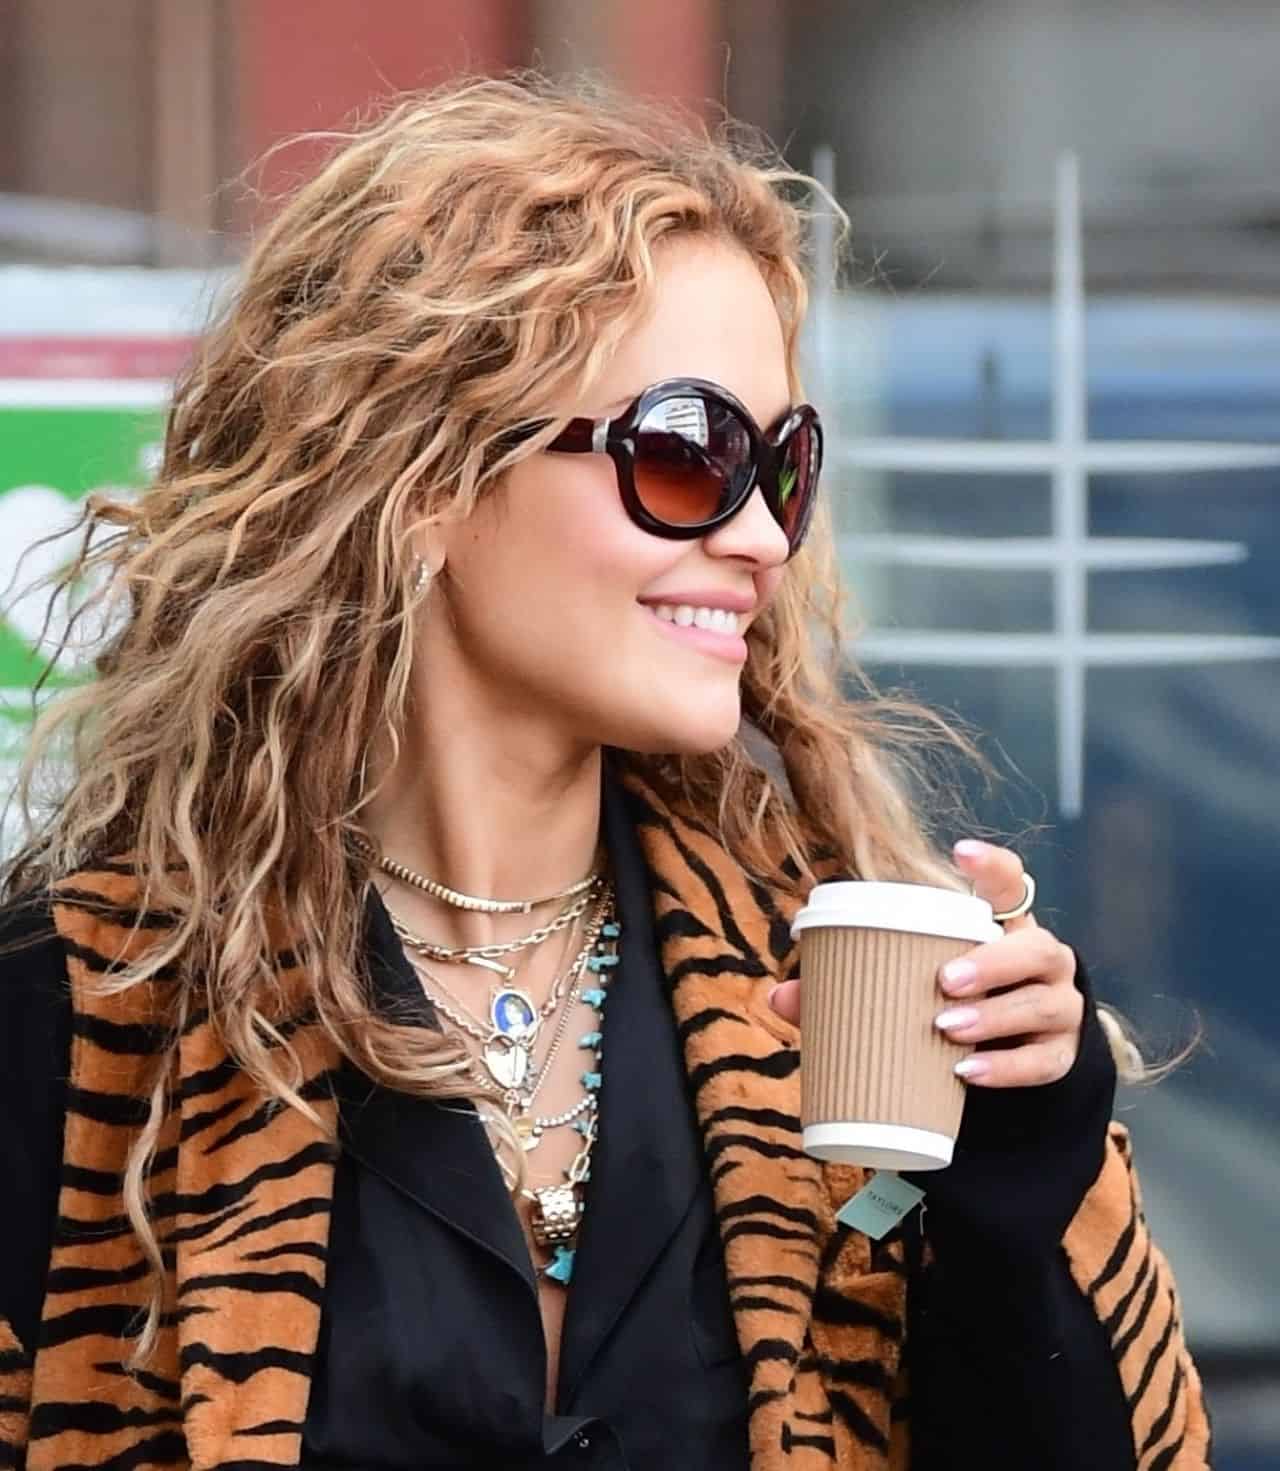 Rita Ora Looks Fiercely Chic in a Tiger Print Jacket at the London Heliport